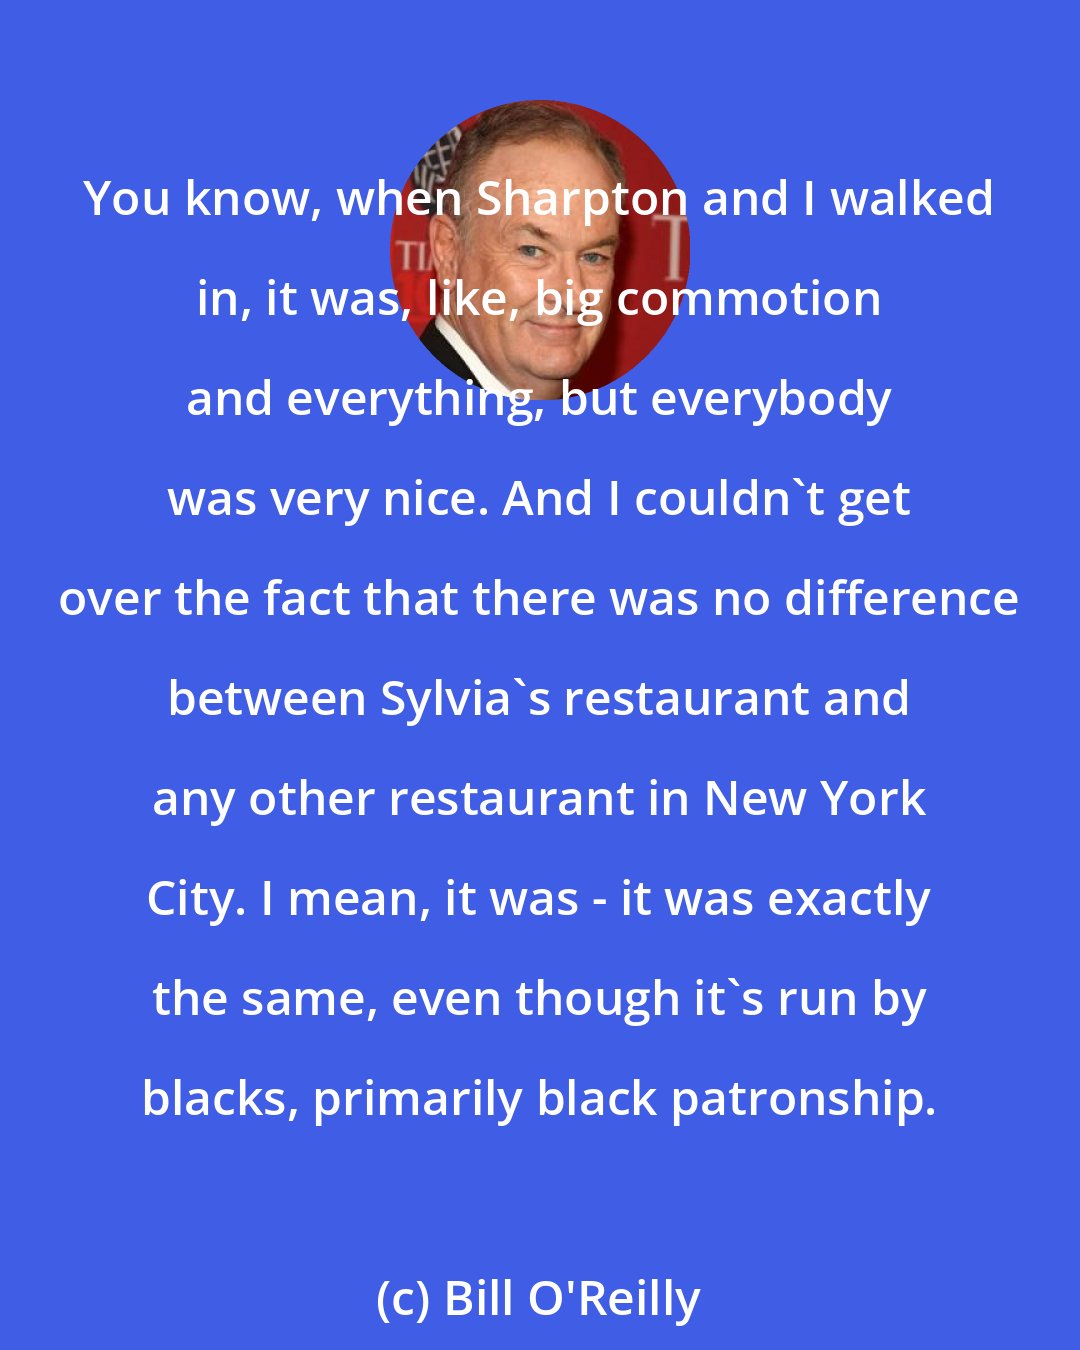 Bill O'Reilly: You know, when Sharpton and I walked in, it was, like, big commotion and everything, but everybody was very nice. And I couldn't get over the fact that there was no difference between Sylvia's restaurant and any other restaurant in New York City. I mean, it was - it was exactly the same, even though it's run by blacks, primarily black patronship.